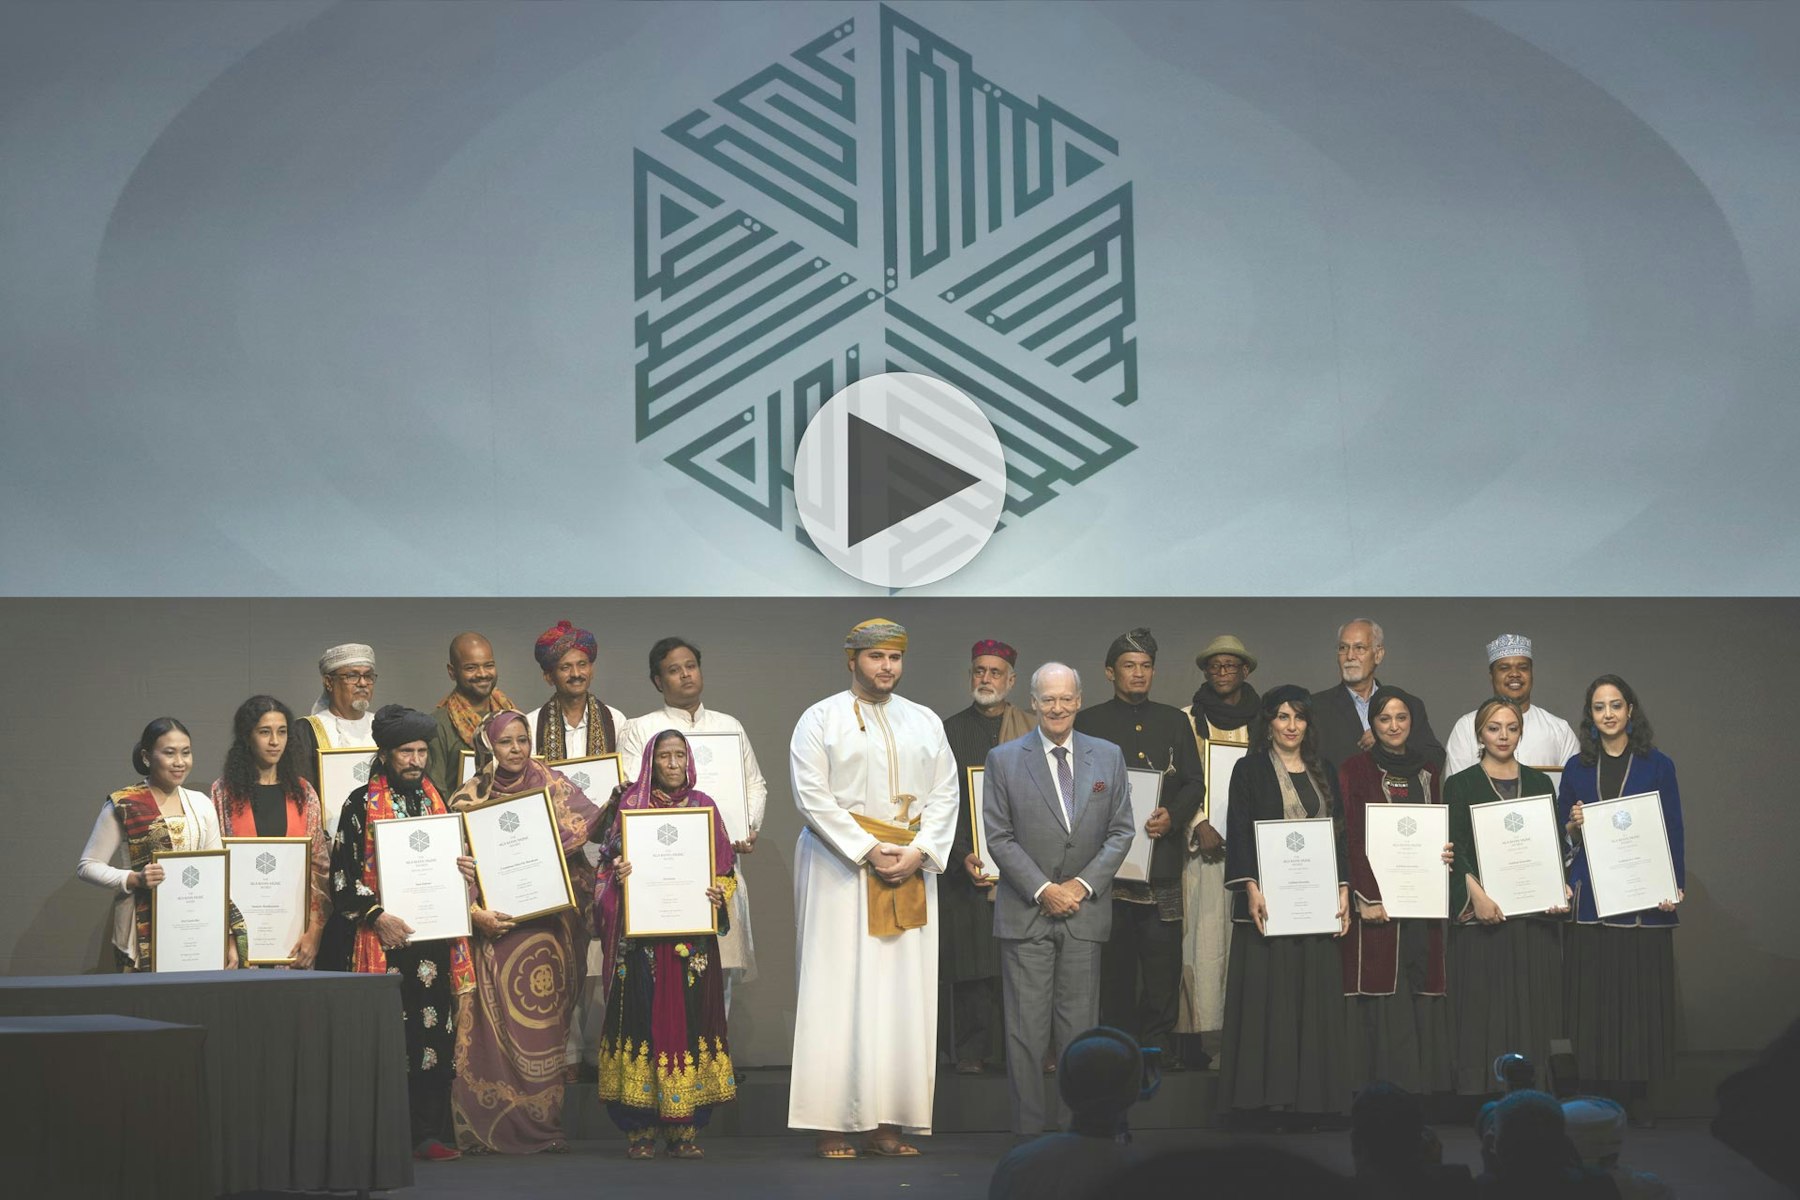 The 2022 Aga Khan Music Awards have concluded with the presentation of awards to 15 laureates by His Highness Sayyid Bilarab bin Haitham Al Said and Prince Amyn Aga Khan during a gala concert at Royal Opera House Muscat’s House of Musical Arts.